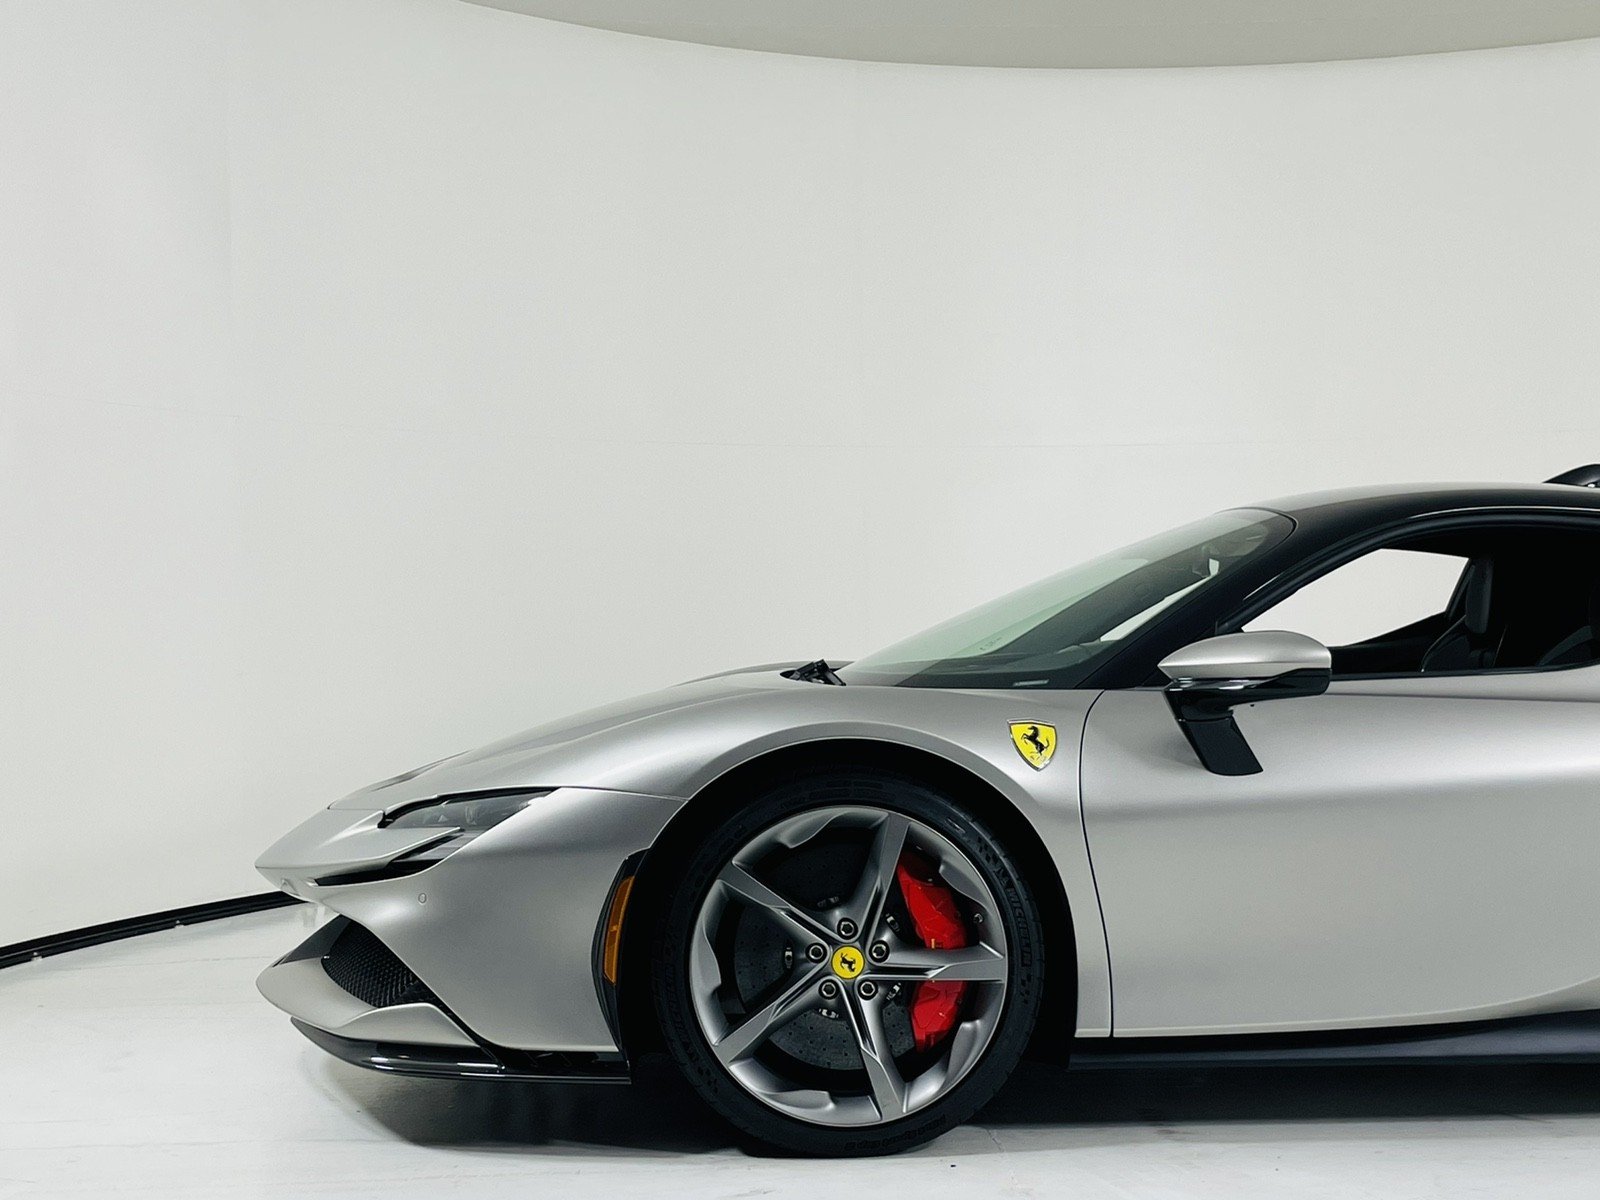 USED 2021 FERRARI SF90 STRADALE COUPE W A 650K MSRP FOR SALE (20)